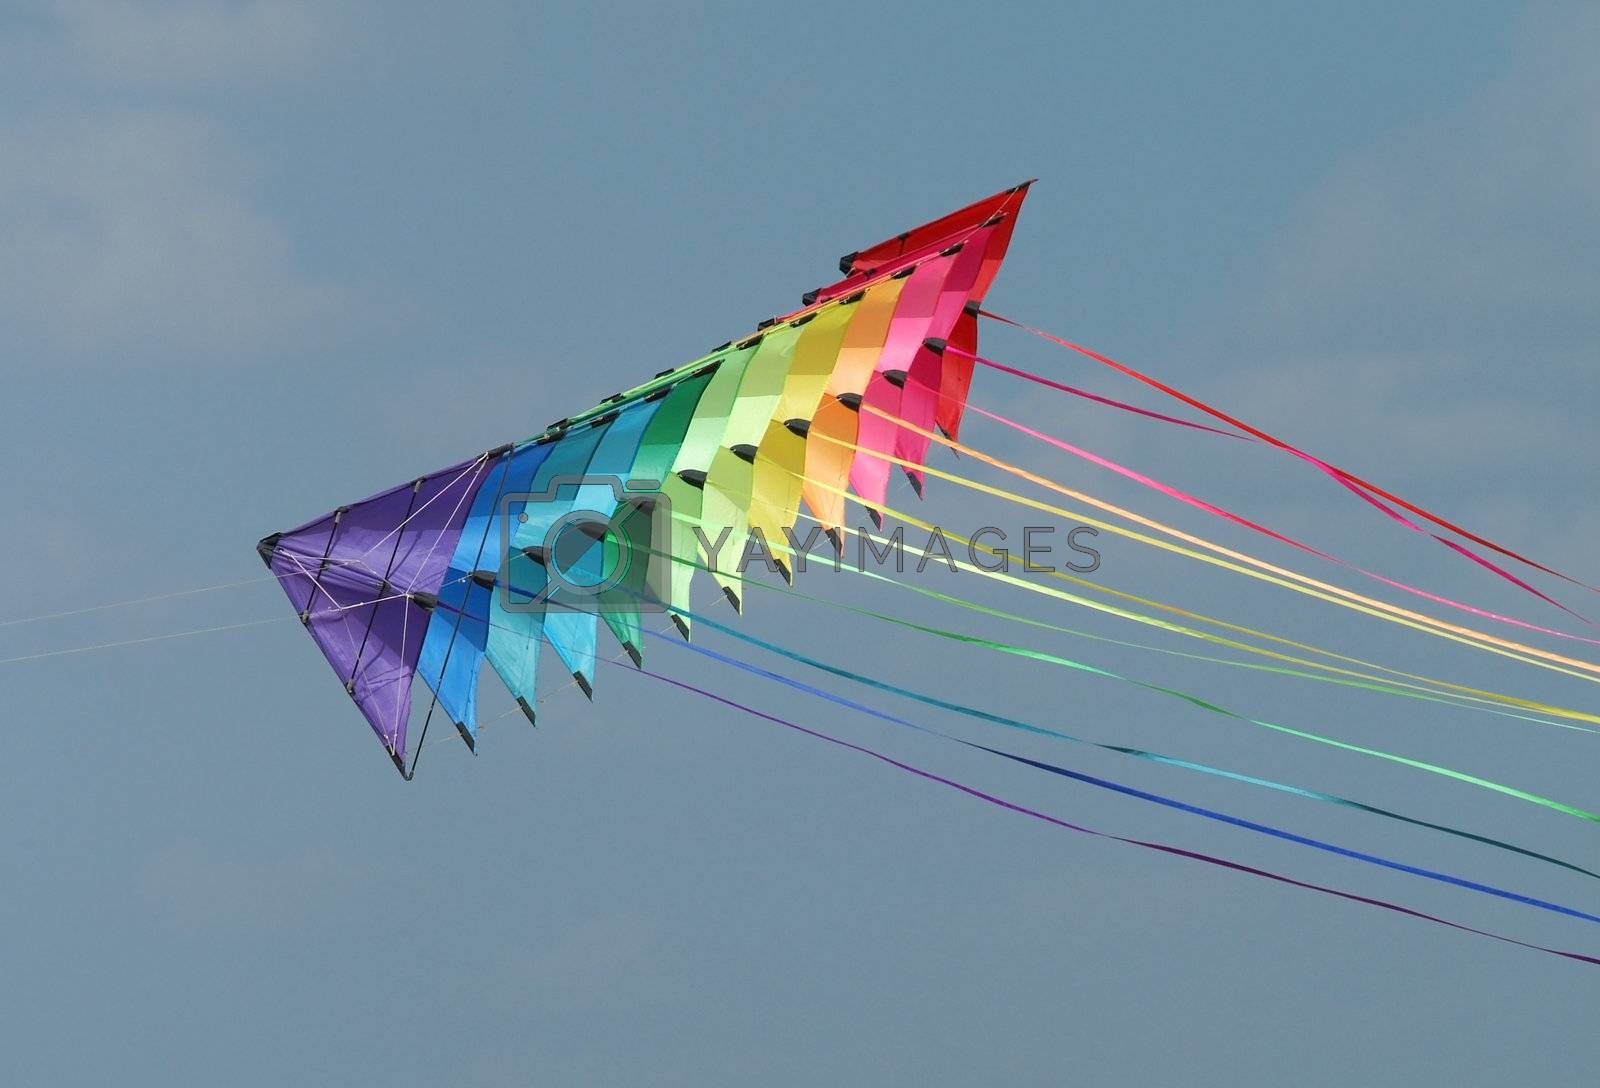 Royalty free image of Colourful kites by epixx